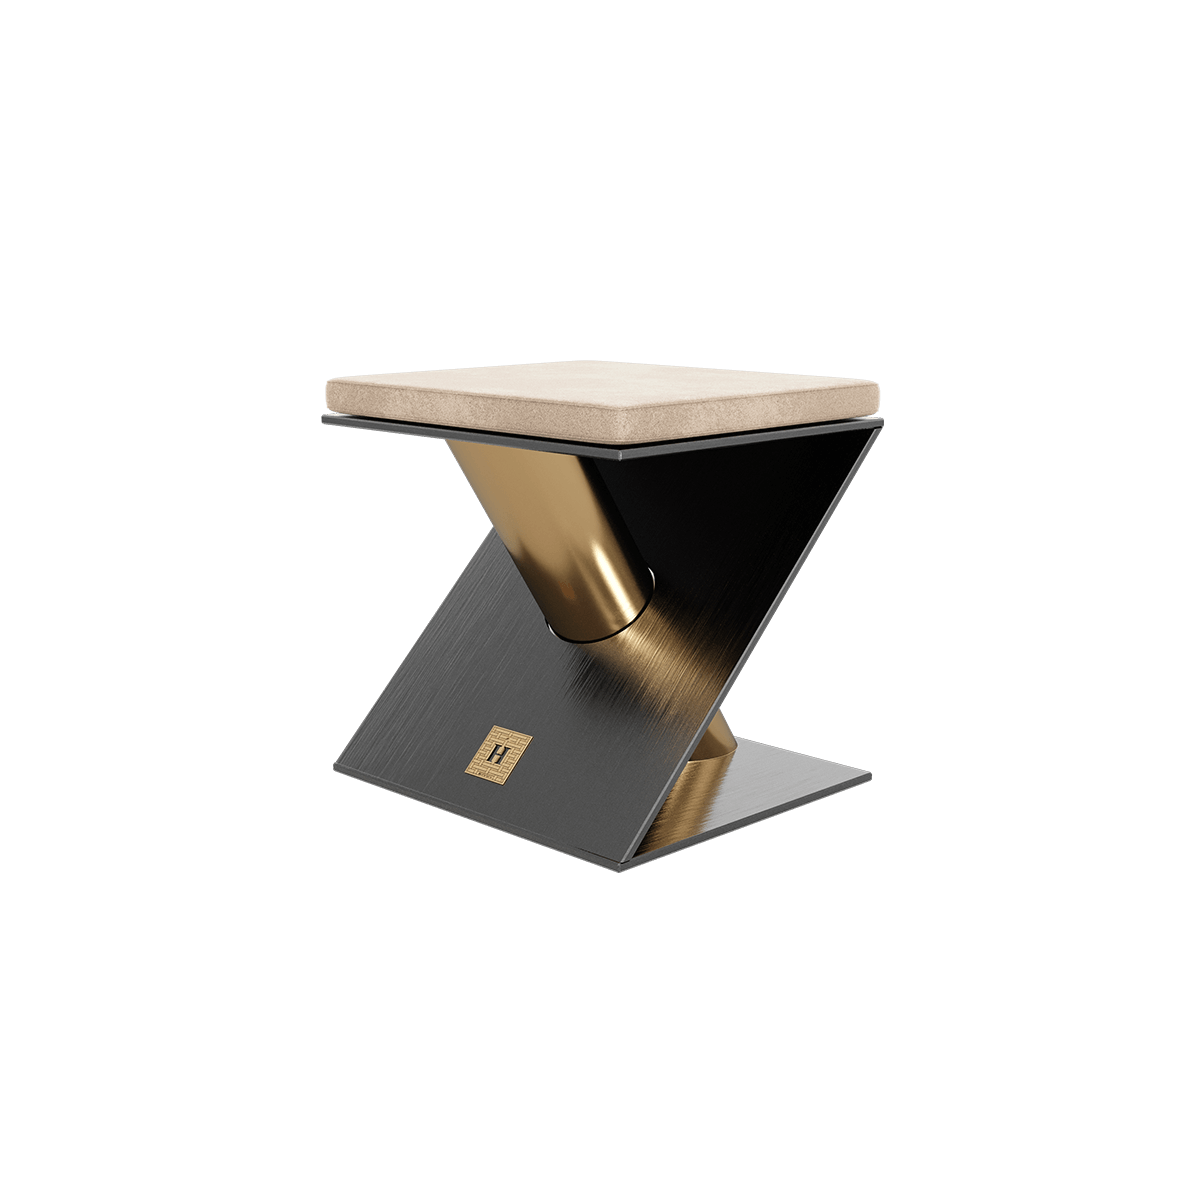 modern stool wiht gold details for a modern interior design project